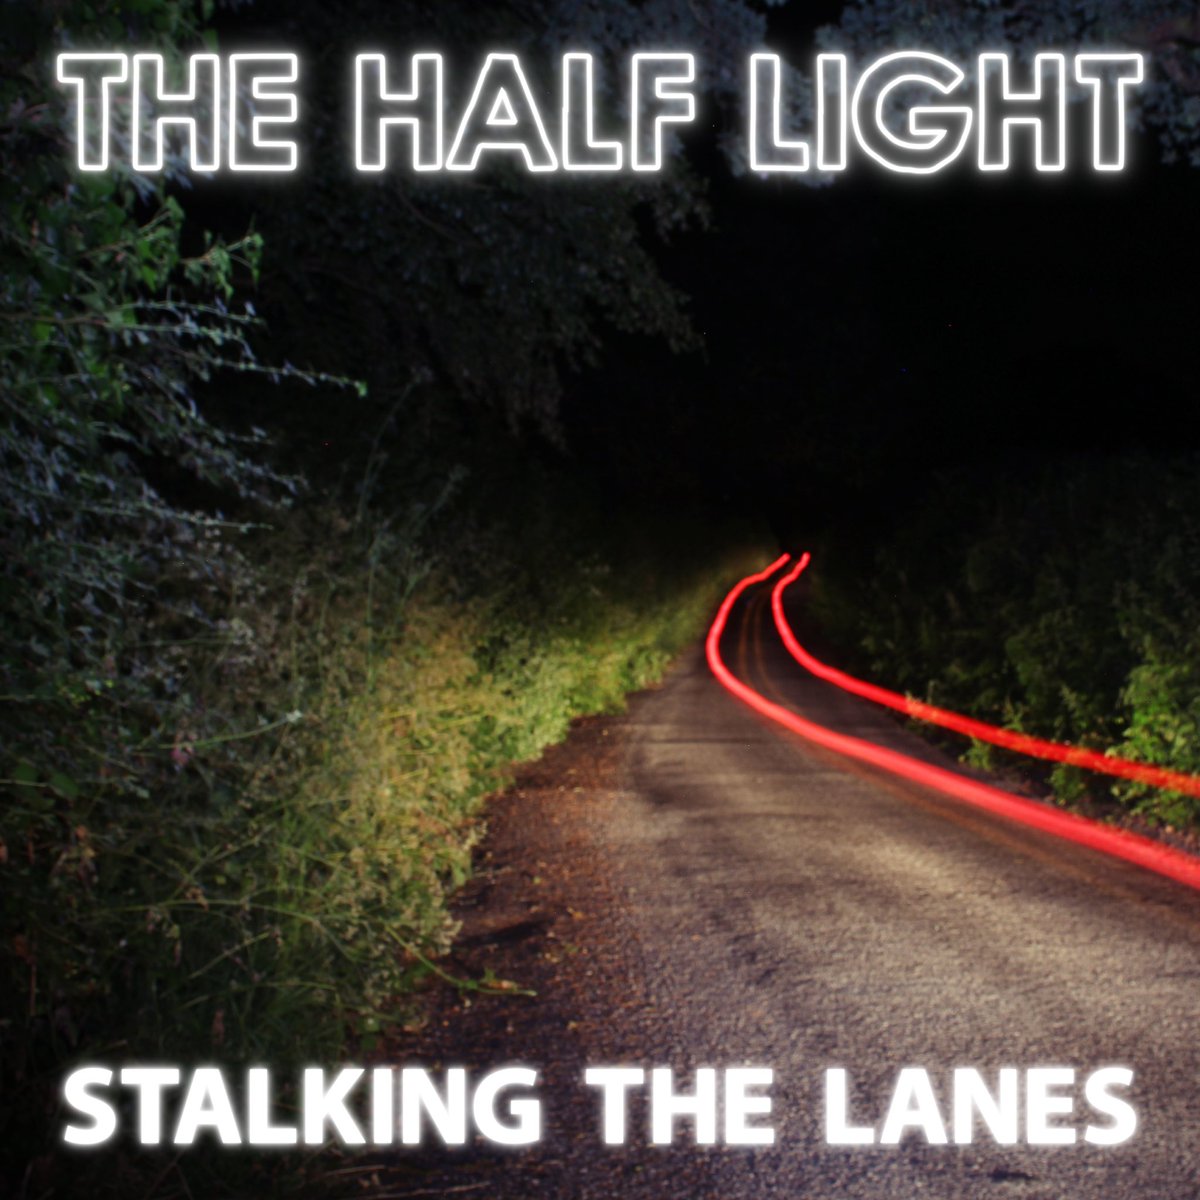 Coming soon: Stalking The Lanes, the full EP collection of our latest material, is out on 14th June. It will also feature Angela, the fifth and final single from the recordings. Big gig news also to follow…